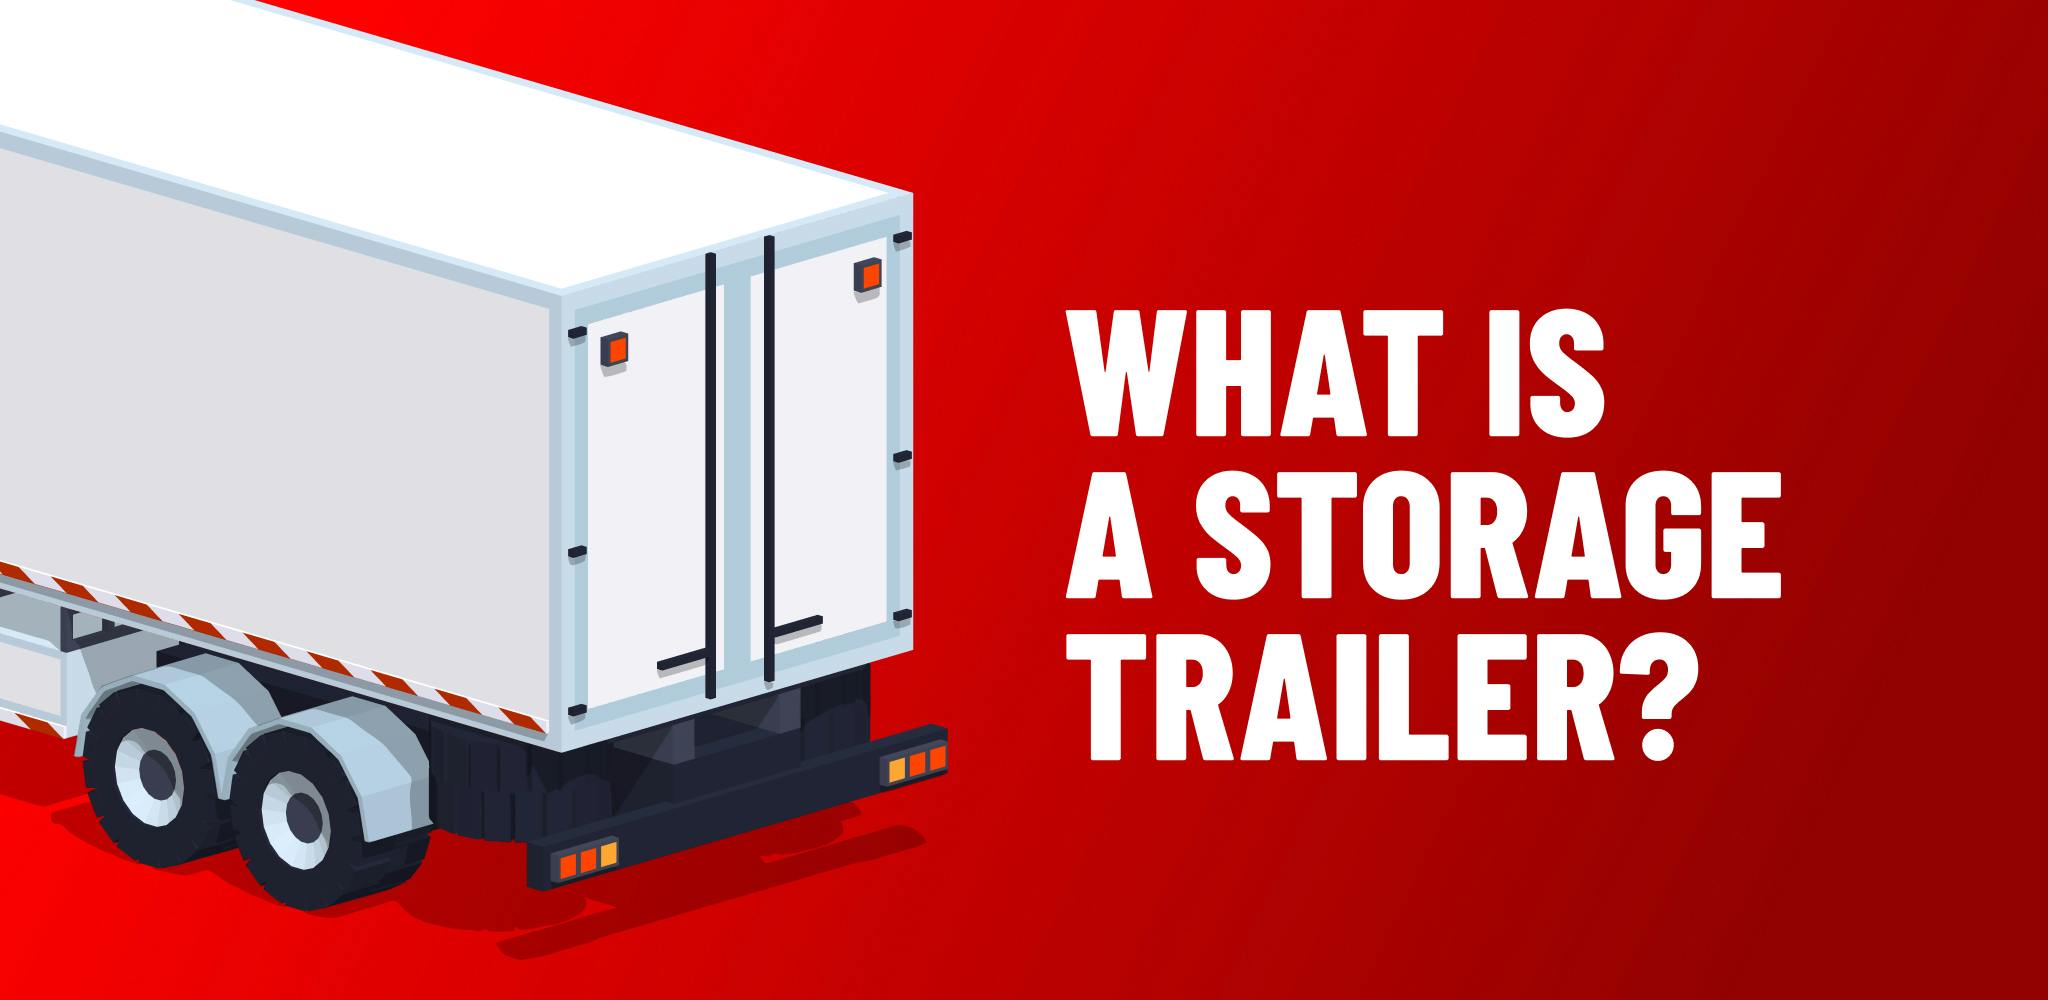 What is a storage trailer?